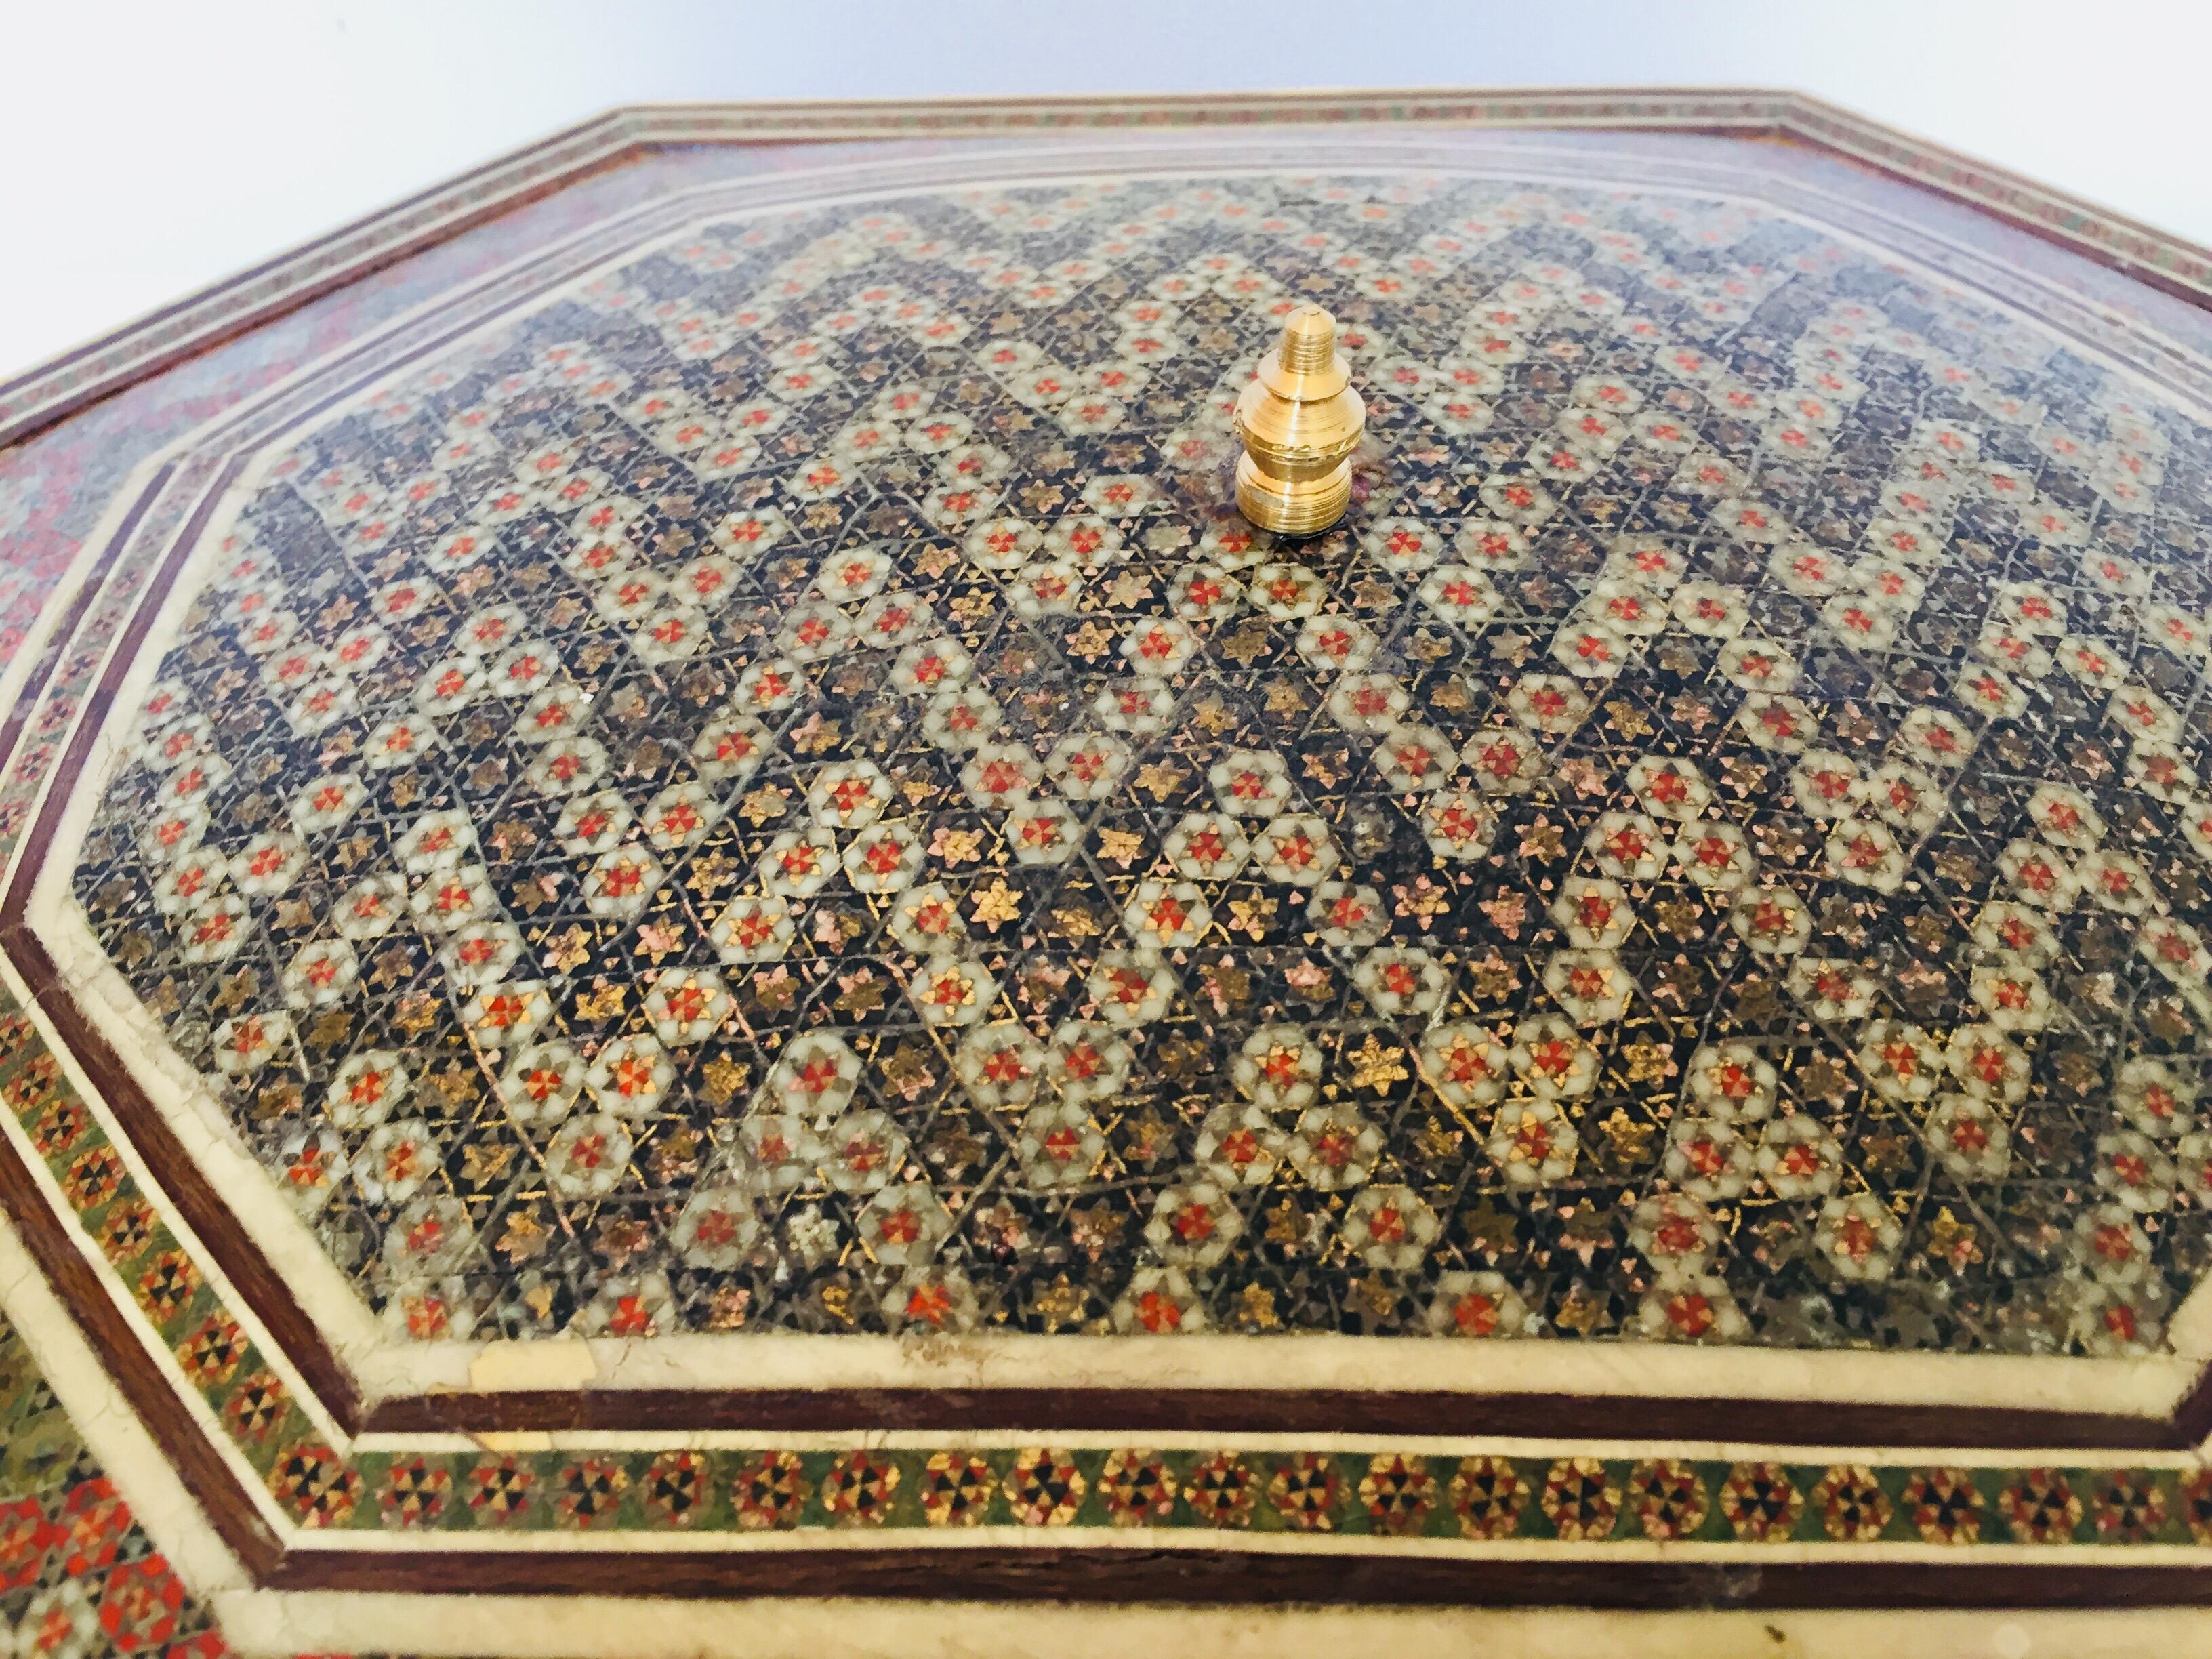 Large Persian micro mosaic inlaid jewelry box with lid.
Intricate inlaid box with floral and geometric Moorish design.
Micro mosaic designs in bone inlay and marquetry, very fine artwork.
Lined with red velvet.
Museum piece like the ones in